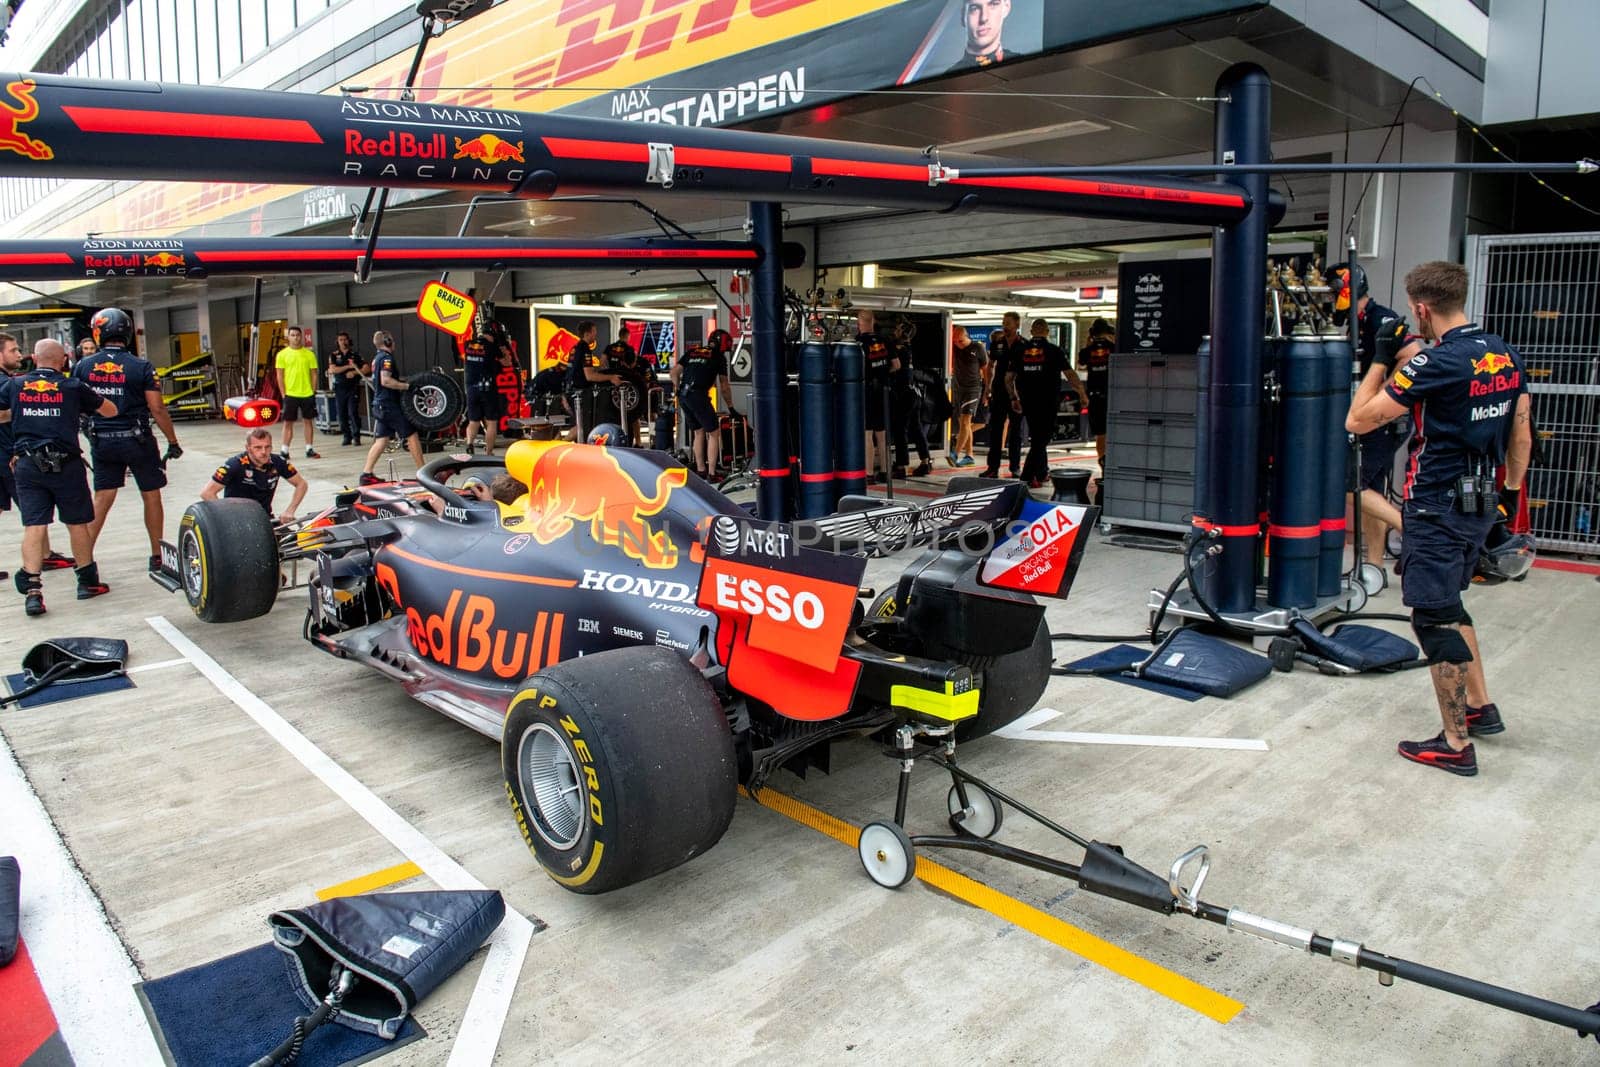 SOCHI, RUSSIA - 29 September 2019: Racing weekend Formula 1 Grand Prix of Russia 2019, Red Bull Racing F1 team pit stop training in team box by MKolesnikov